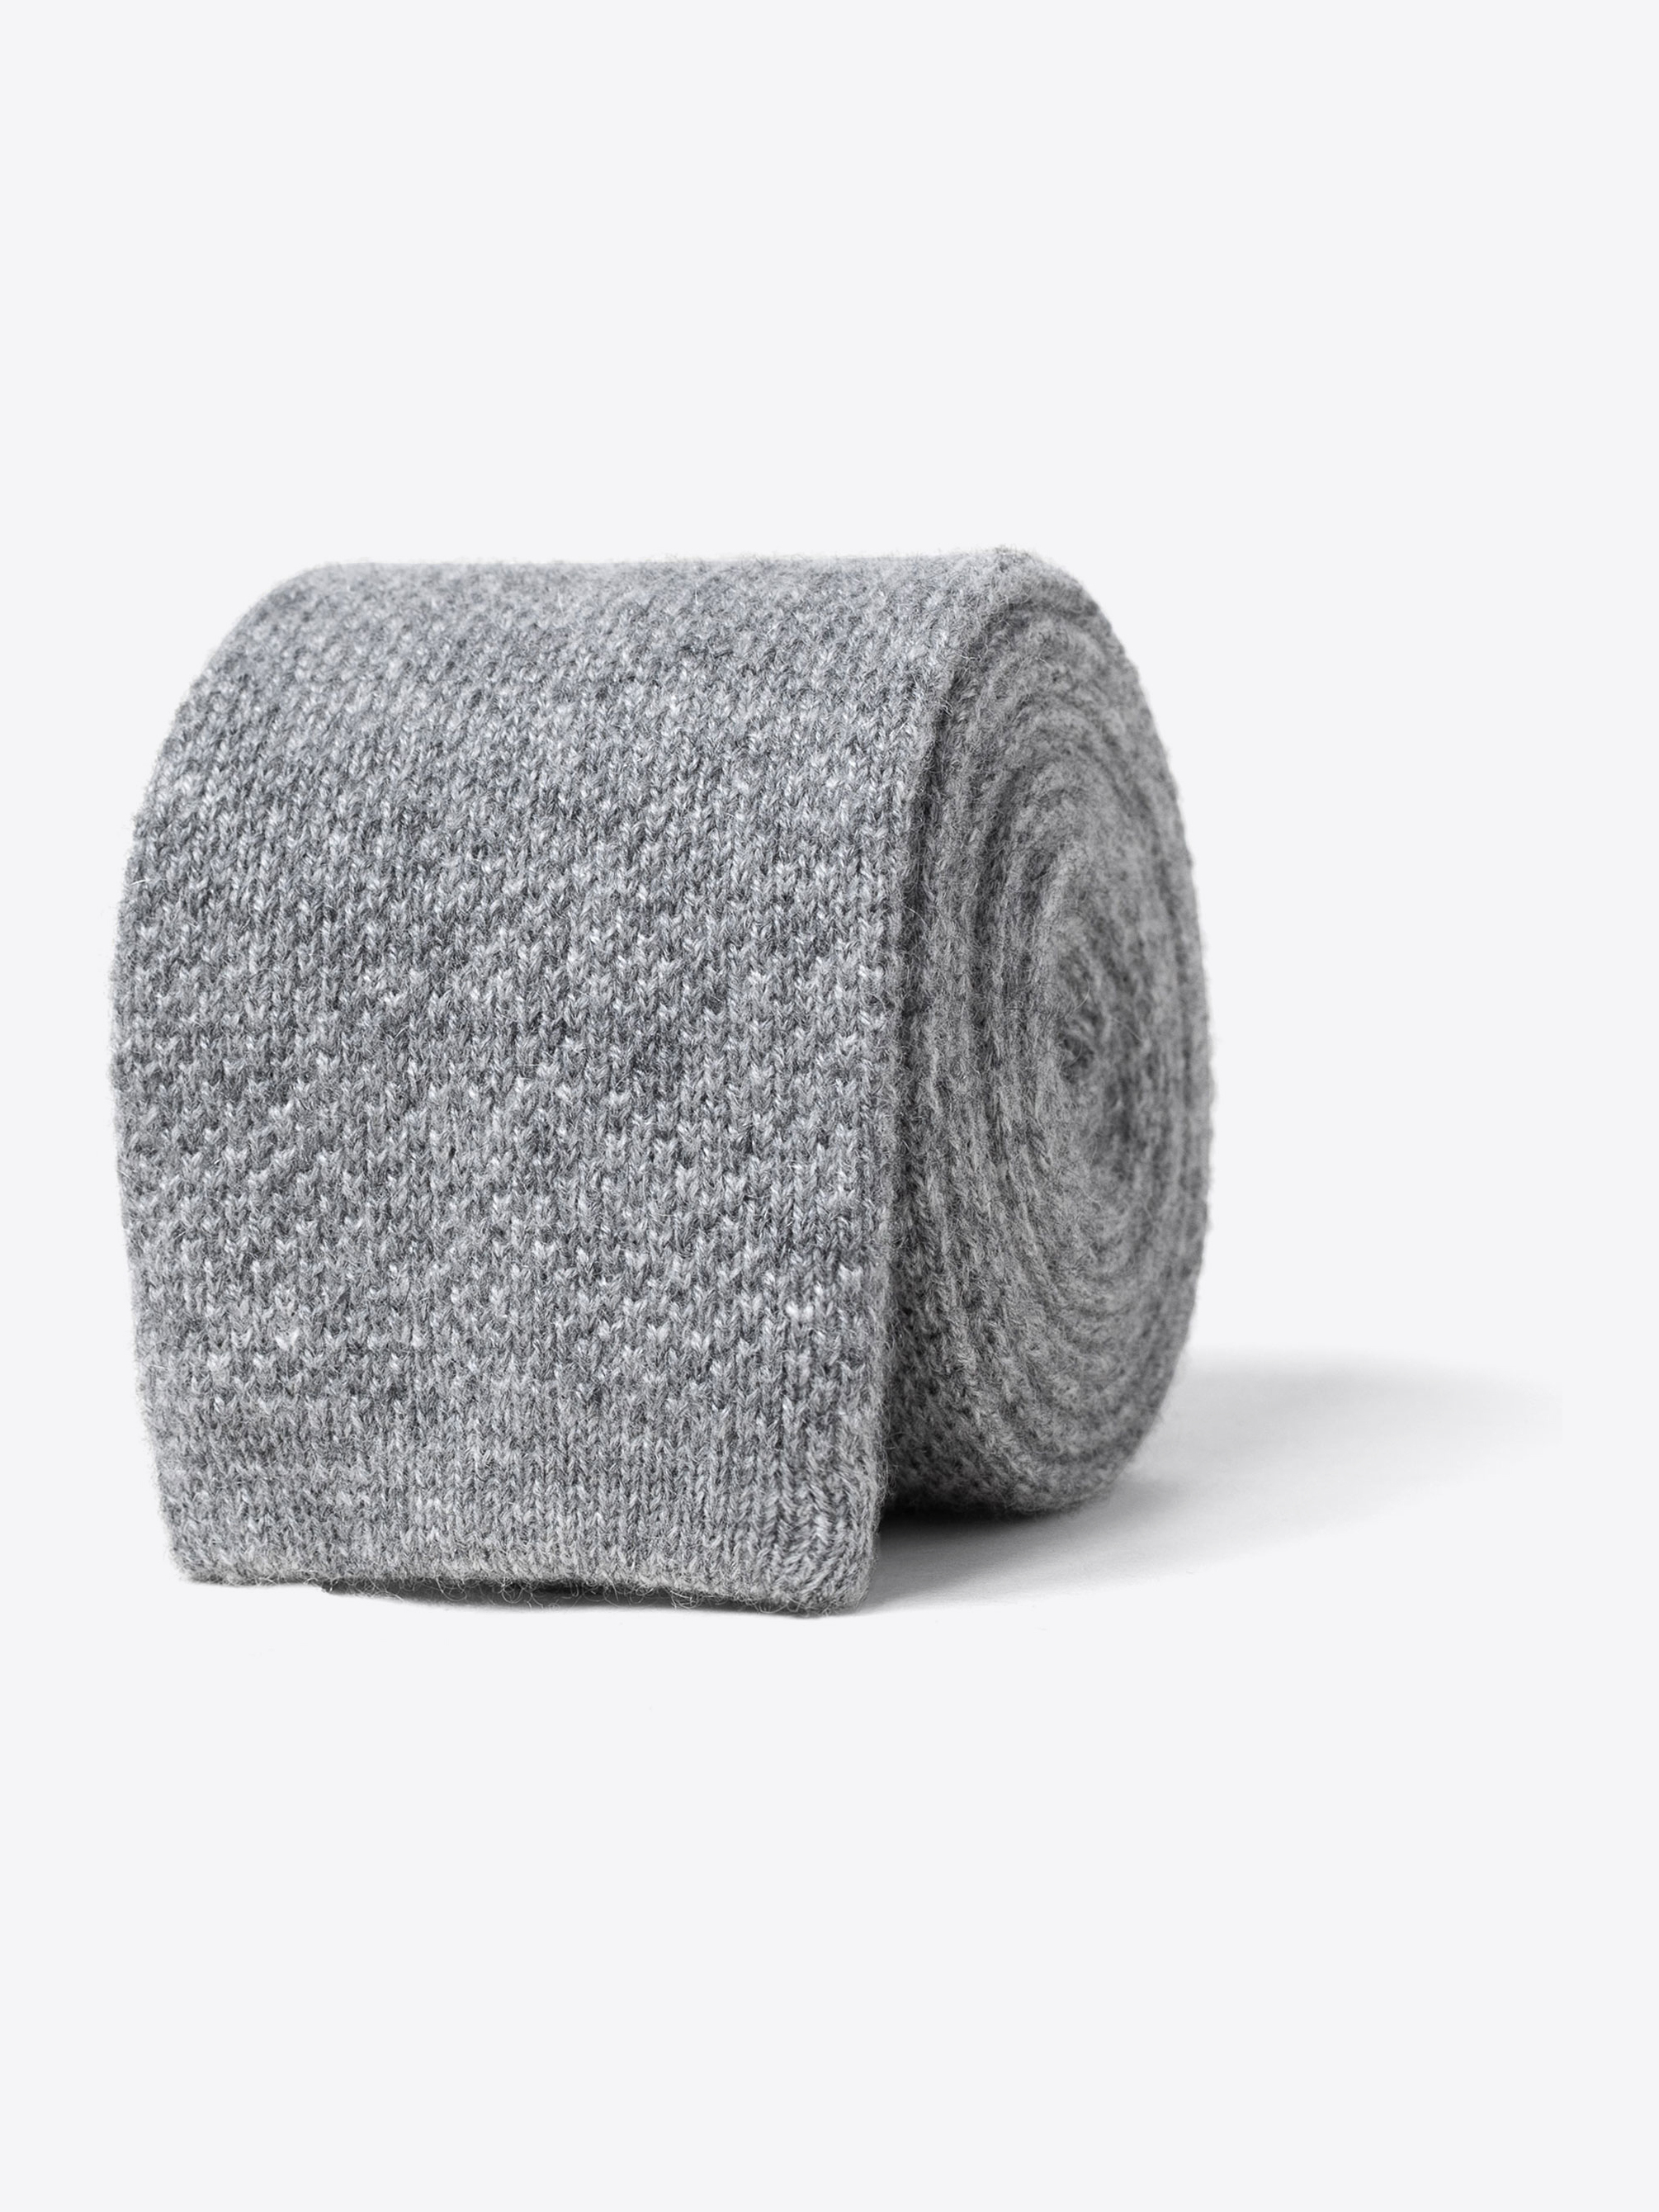 Zoom Image of Grey Cashmere Knit Tie